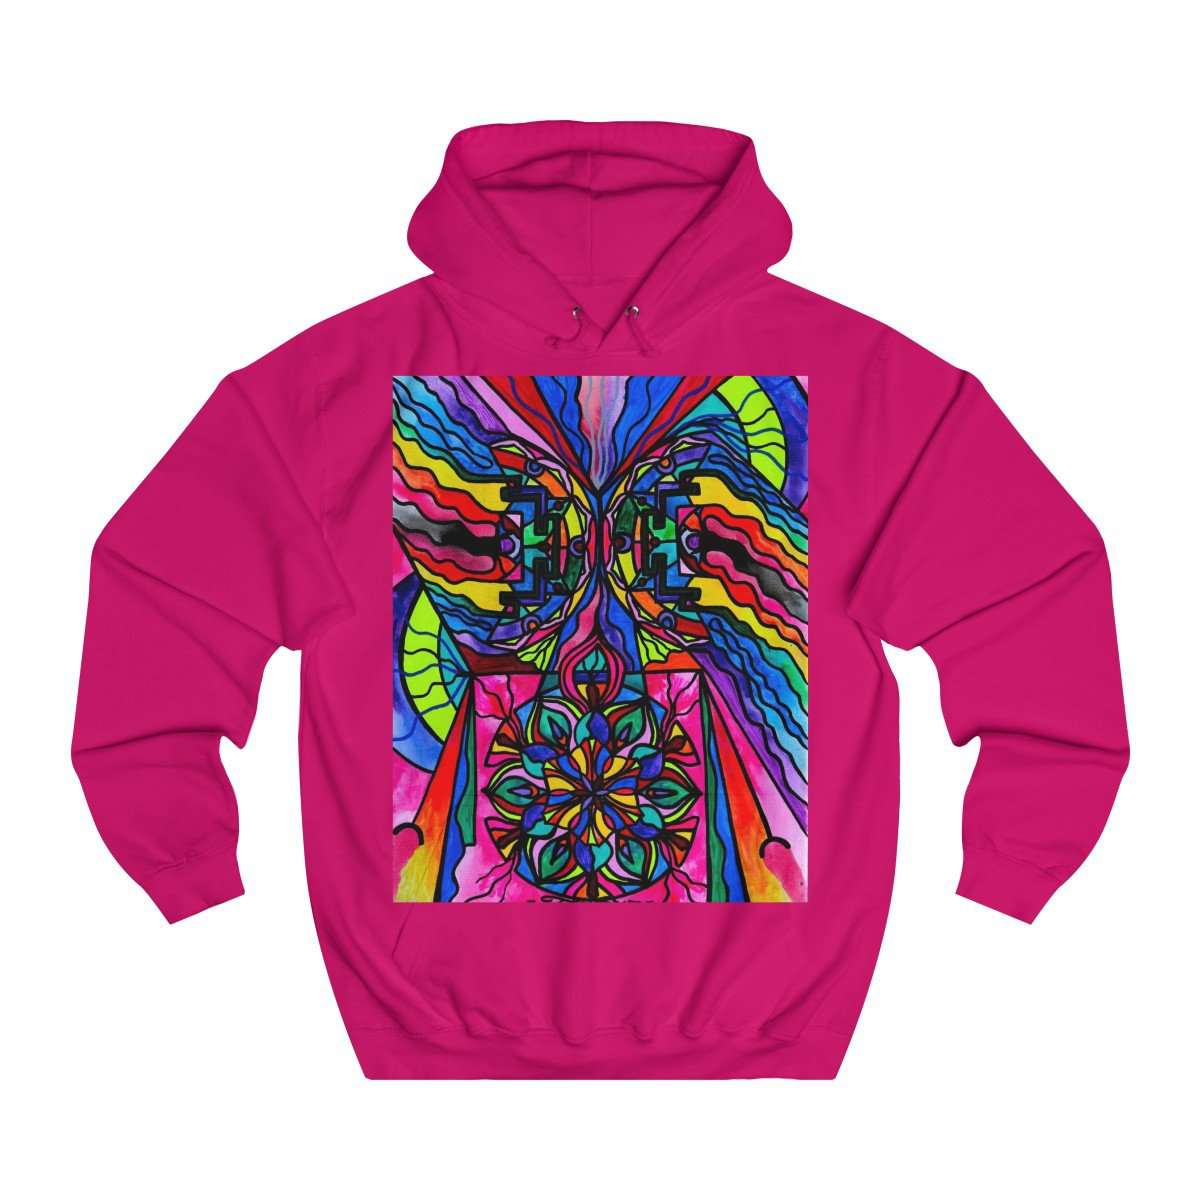 shop-for-non-attachment-unisex-college-hoodie-hot-on-sale_12.jpg